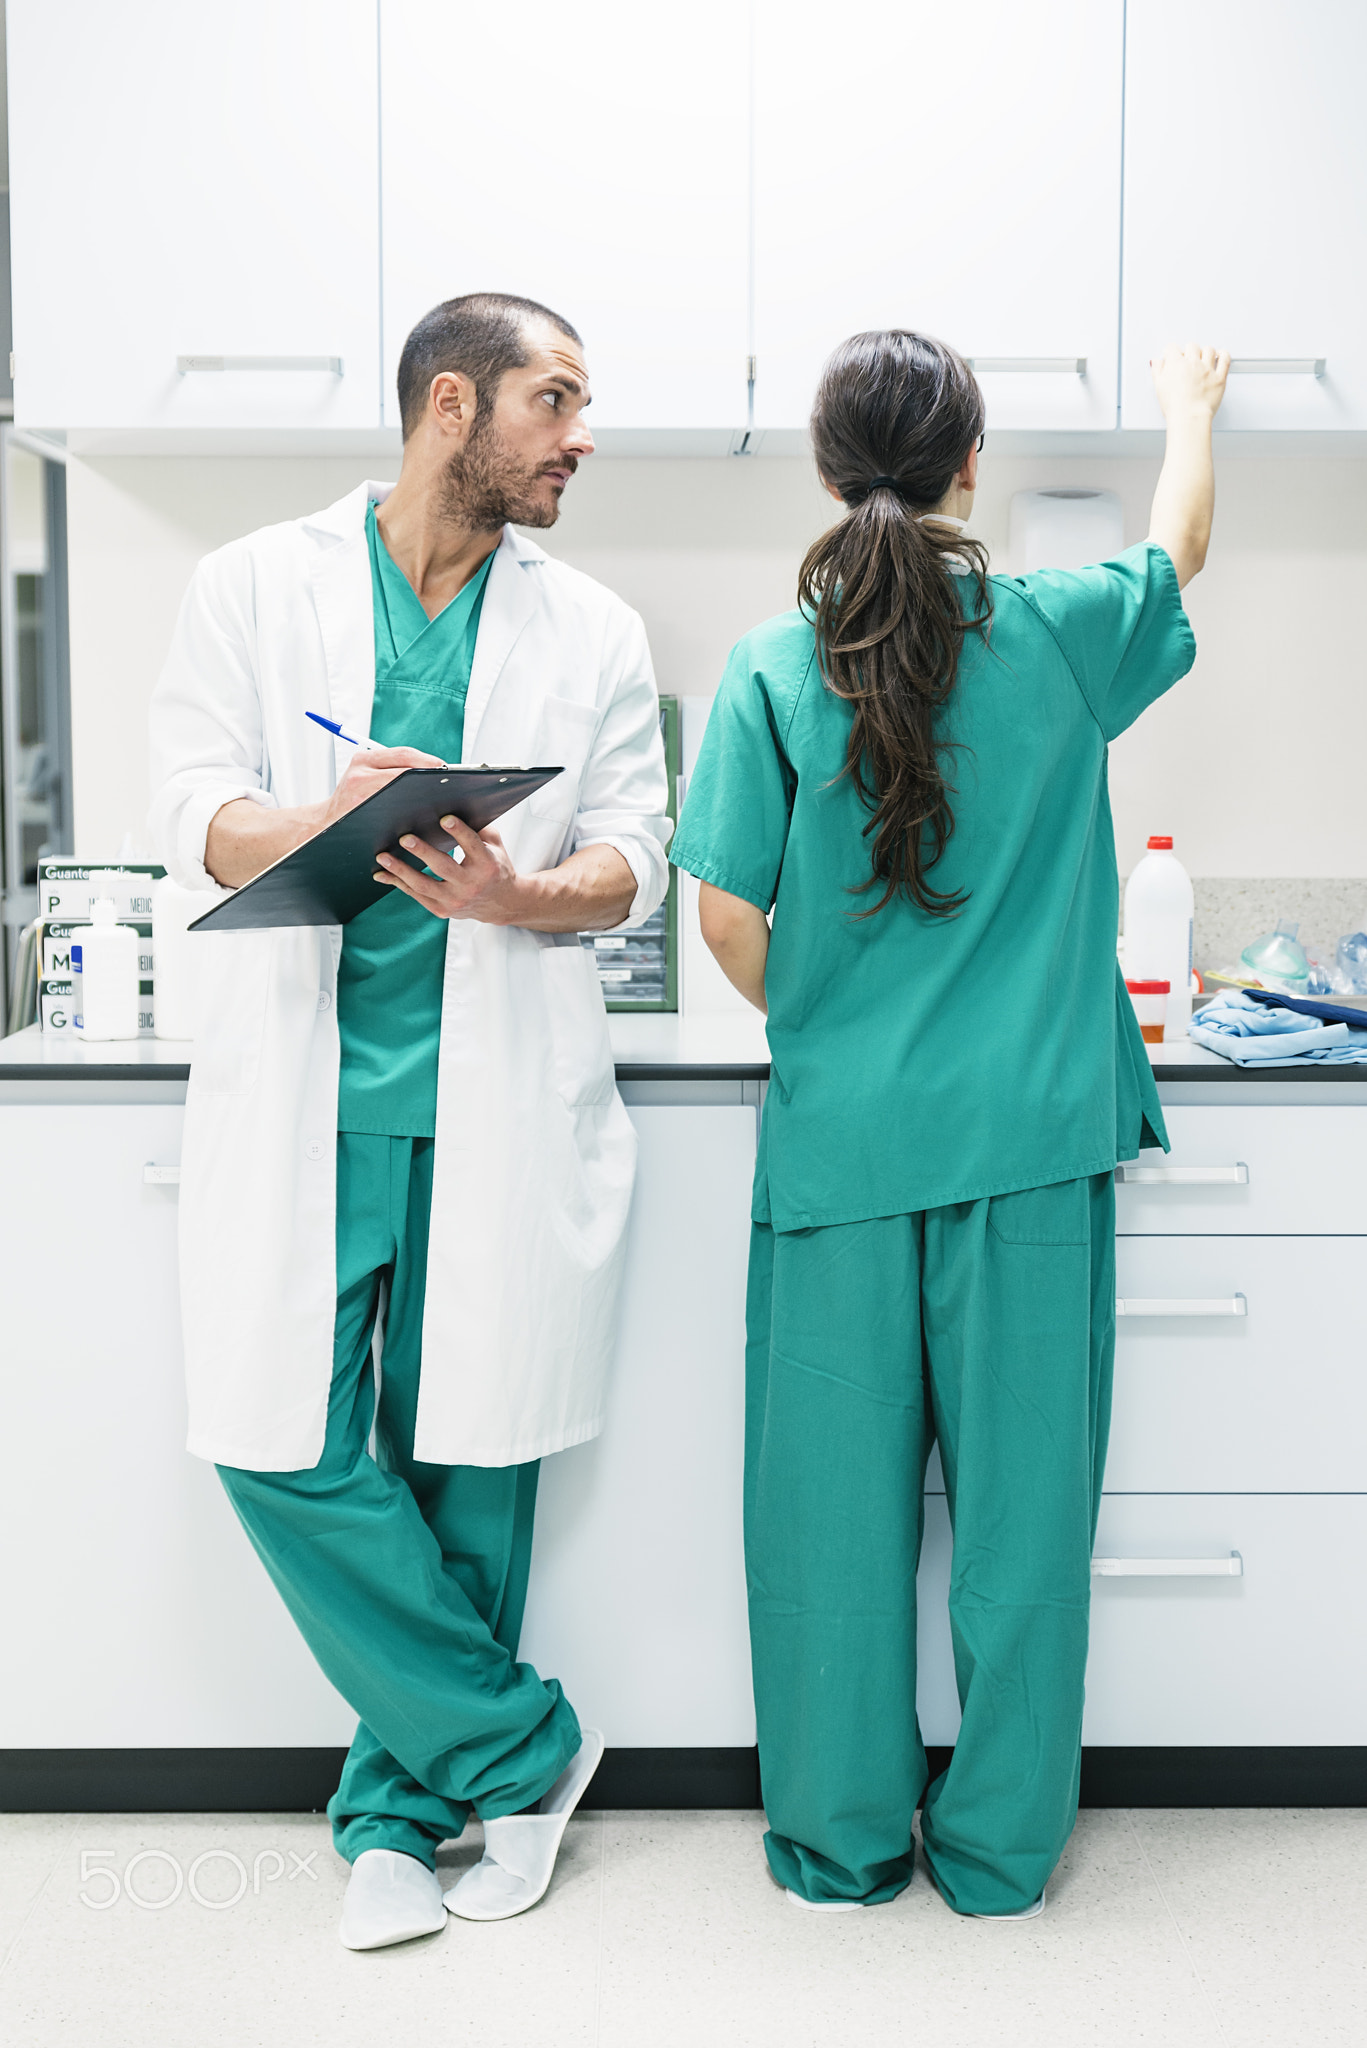 Doctor and nurse examining report of patient